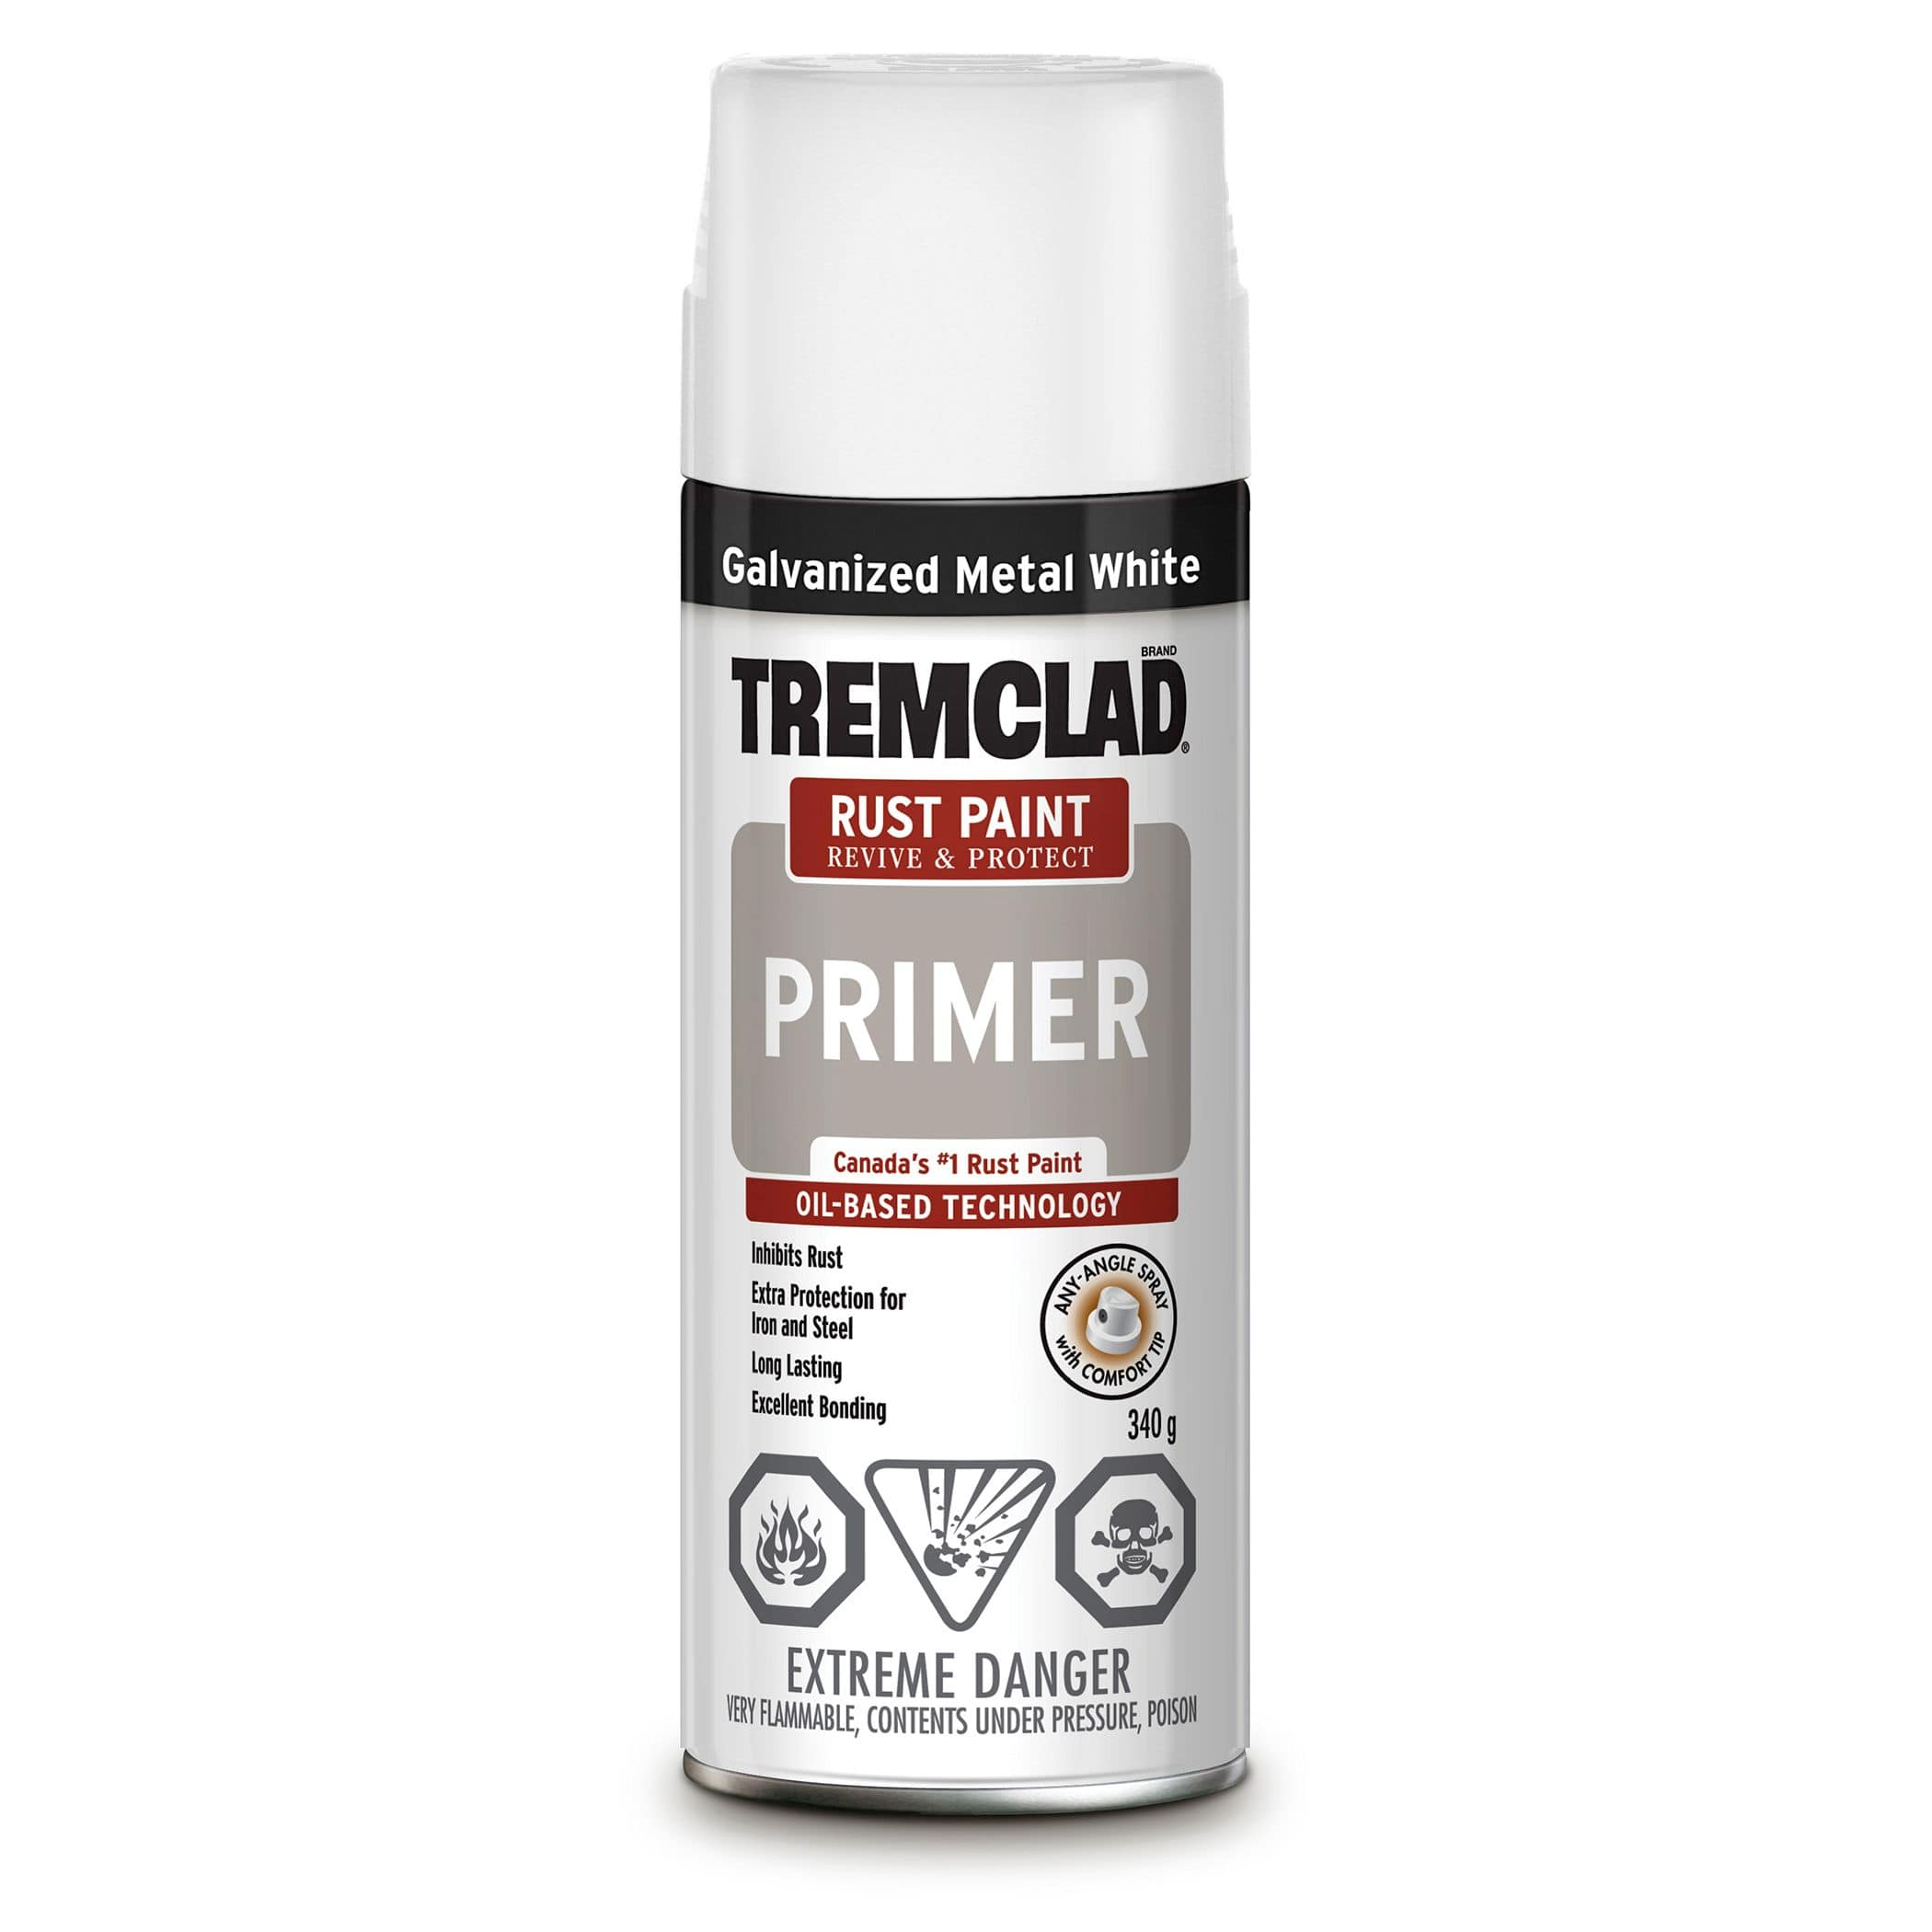 https://media-www.canadiantire.ca/product/fixing/paint/paints/0489228/tremclad-rust-paint-340g-white-metallic-primer-0f4f12c3-e5c3-41fb-81a5-147b2b3a6cab-jpgrendition.jpg